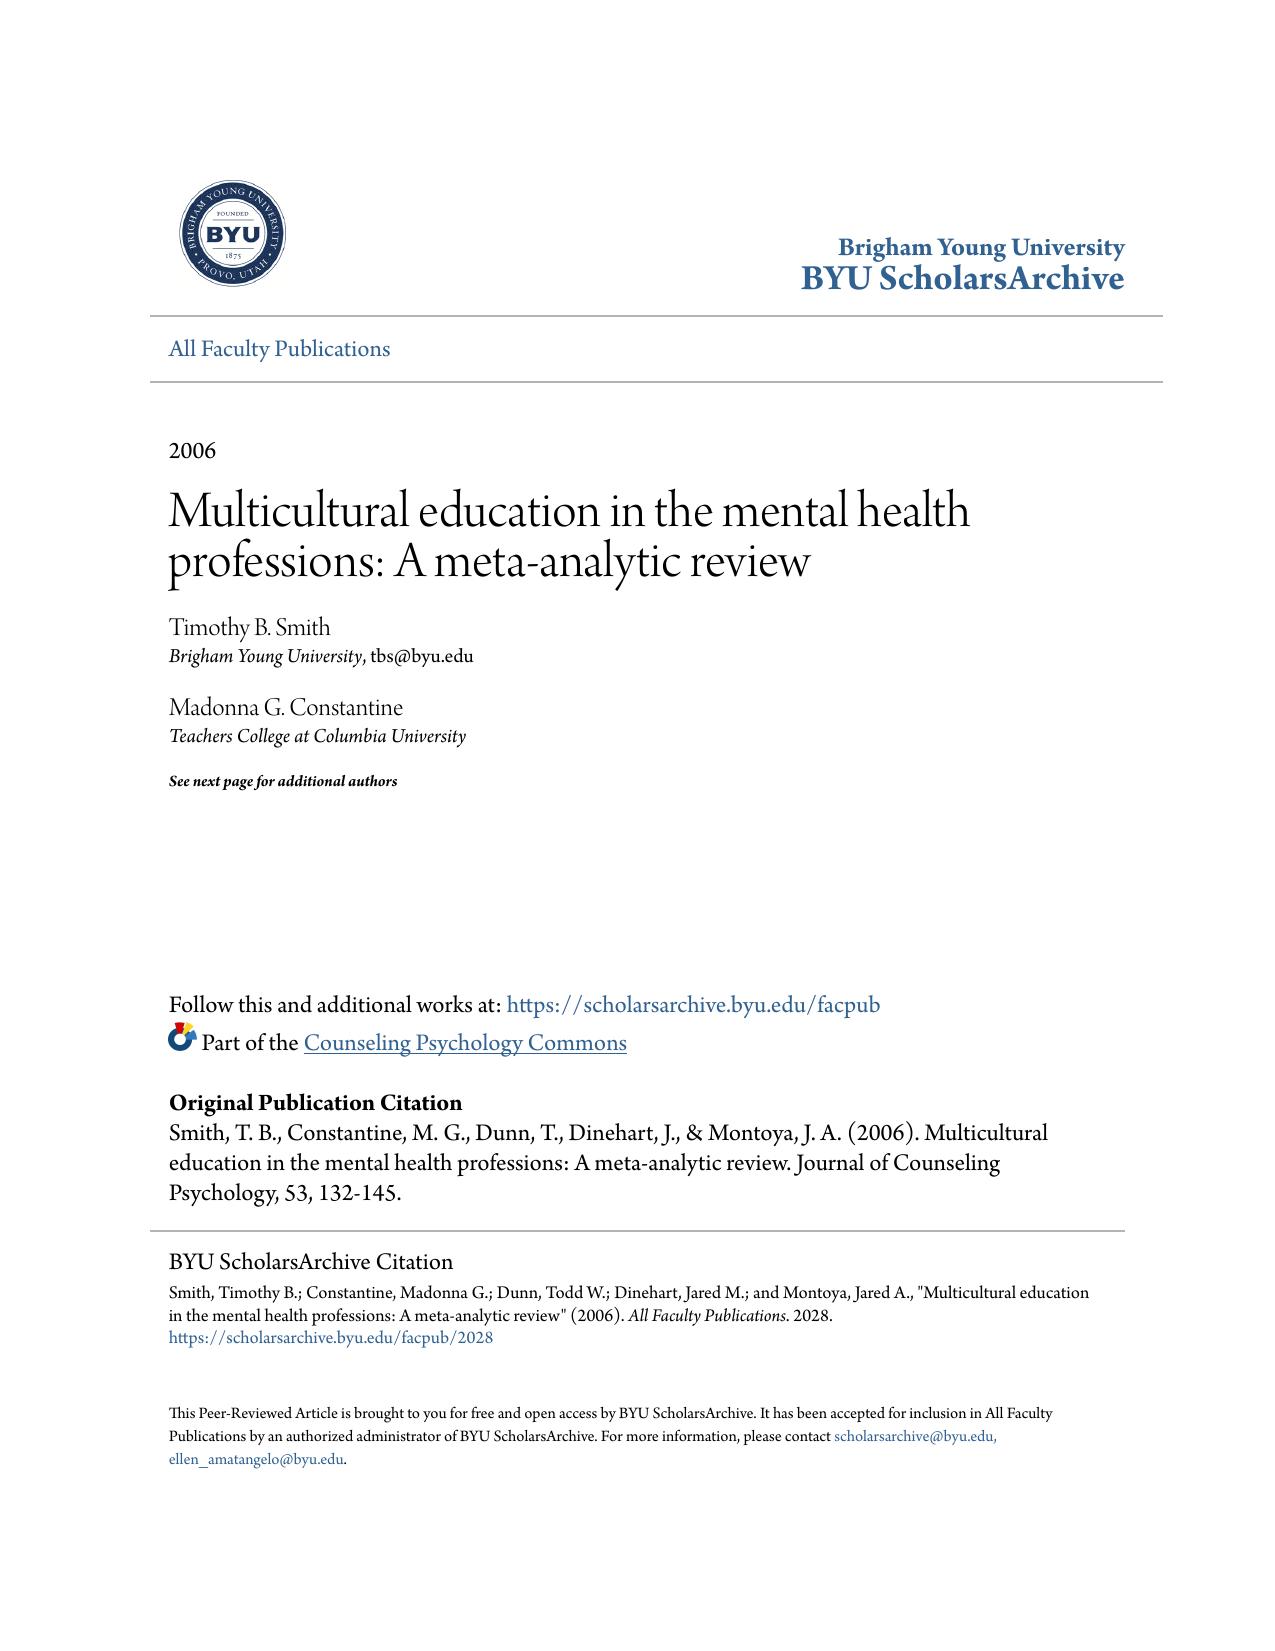 Multicultural education in the mental health professions: A meta-analytic review